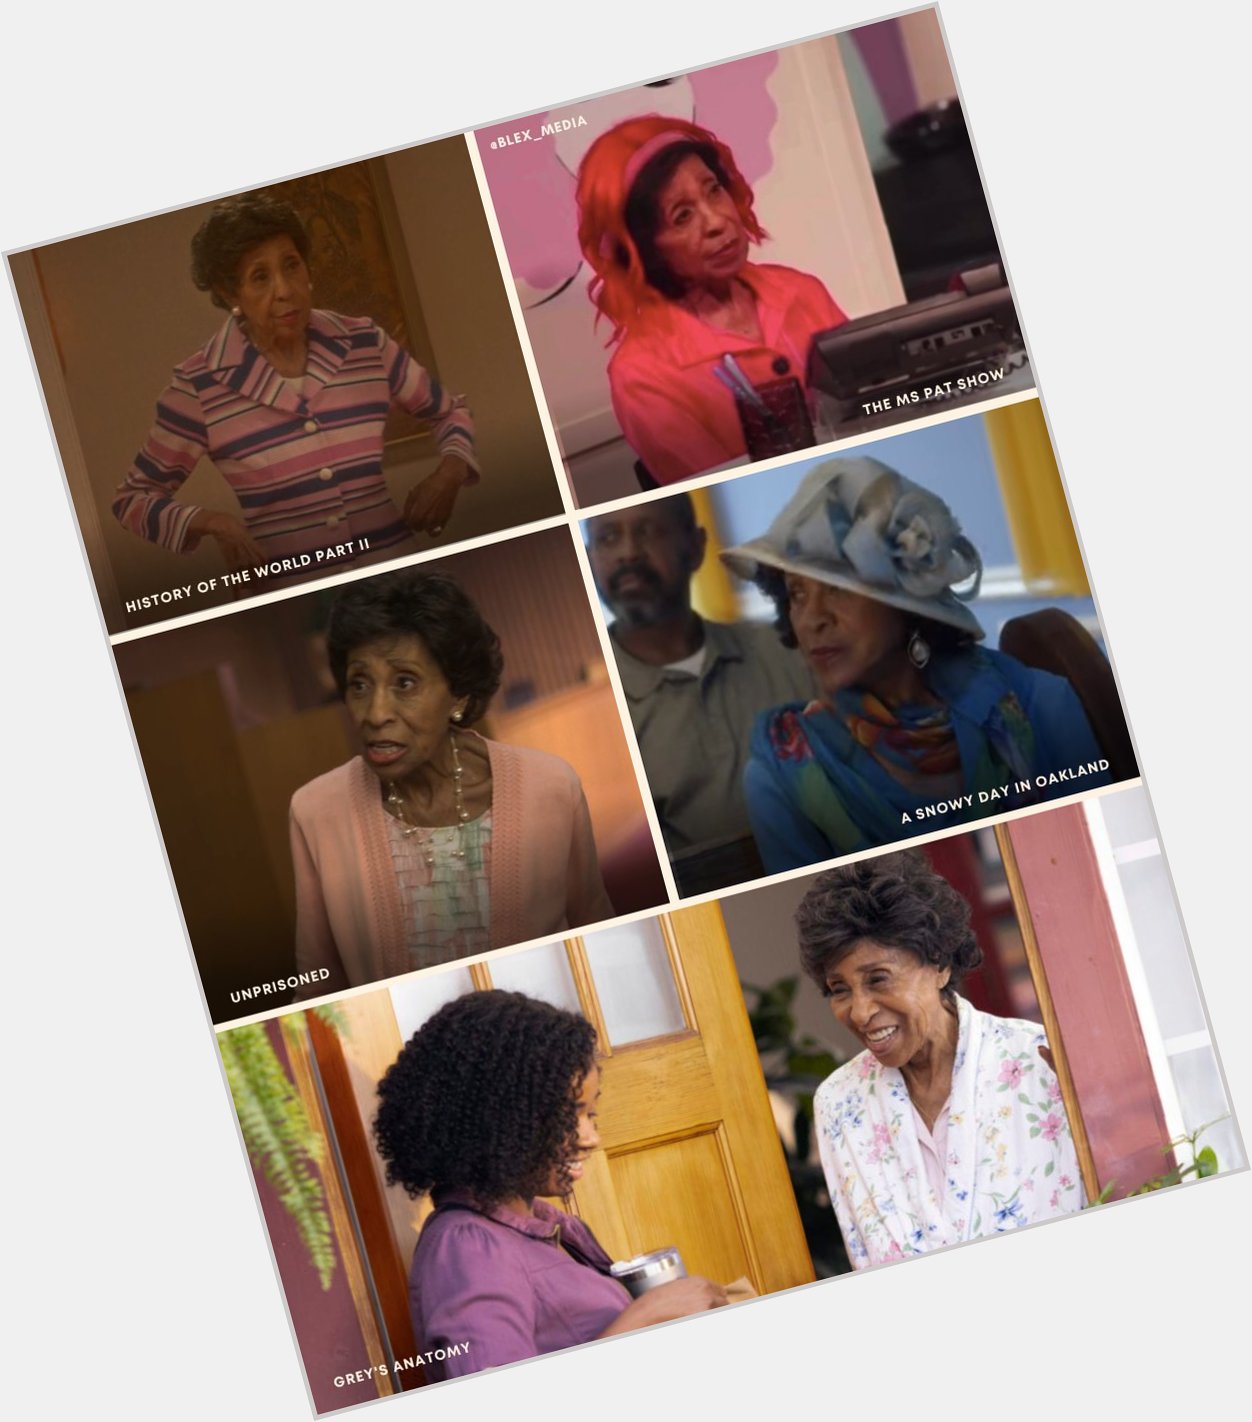 92 where? Marla Gibbs has continuously been booked and busy with 5 projects this year alone. Happy Birthday! 